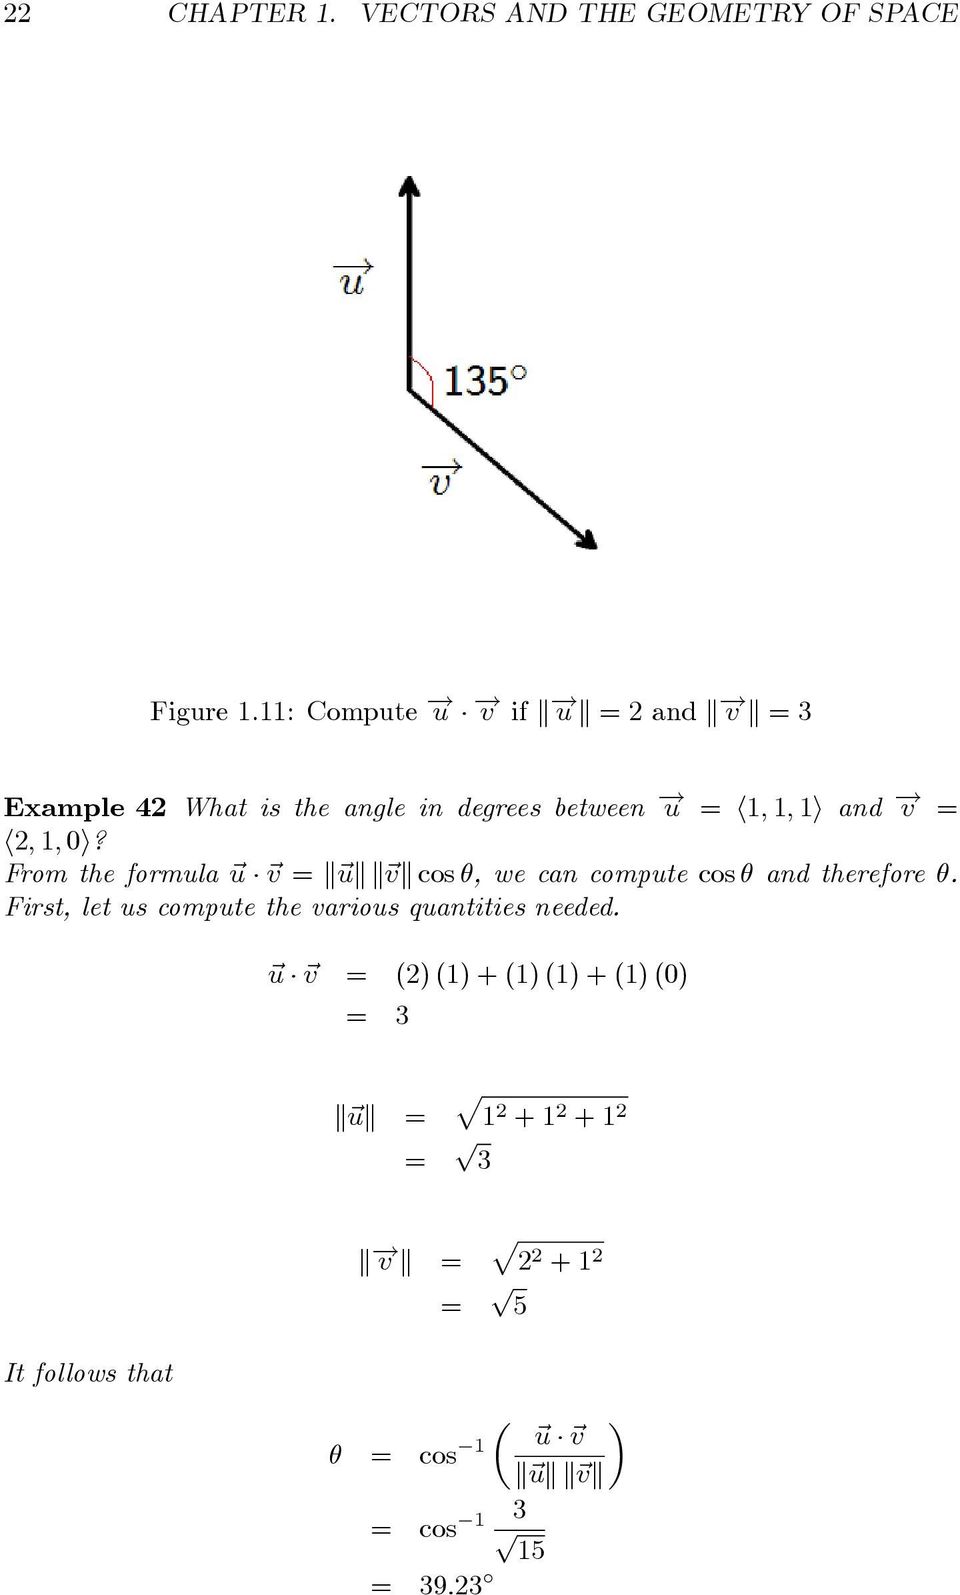 1, 0? From the formula u v = u v cos θ, we can compute cos θ and therefore θ.